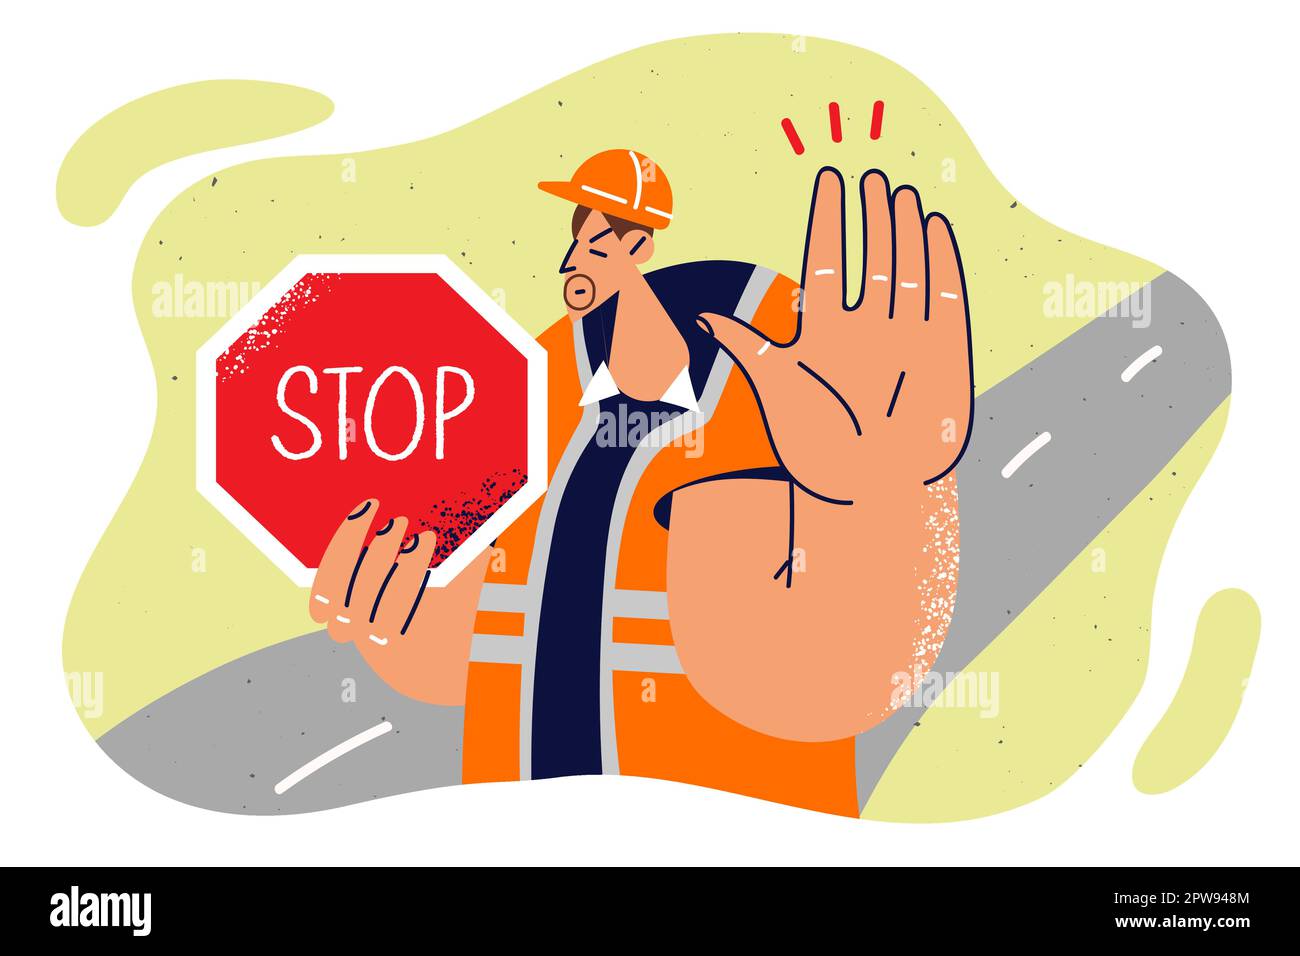 Man in builder uniform shows stop sign and makes caution gesture to warn drivers about road repairs Stock Vector